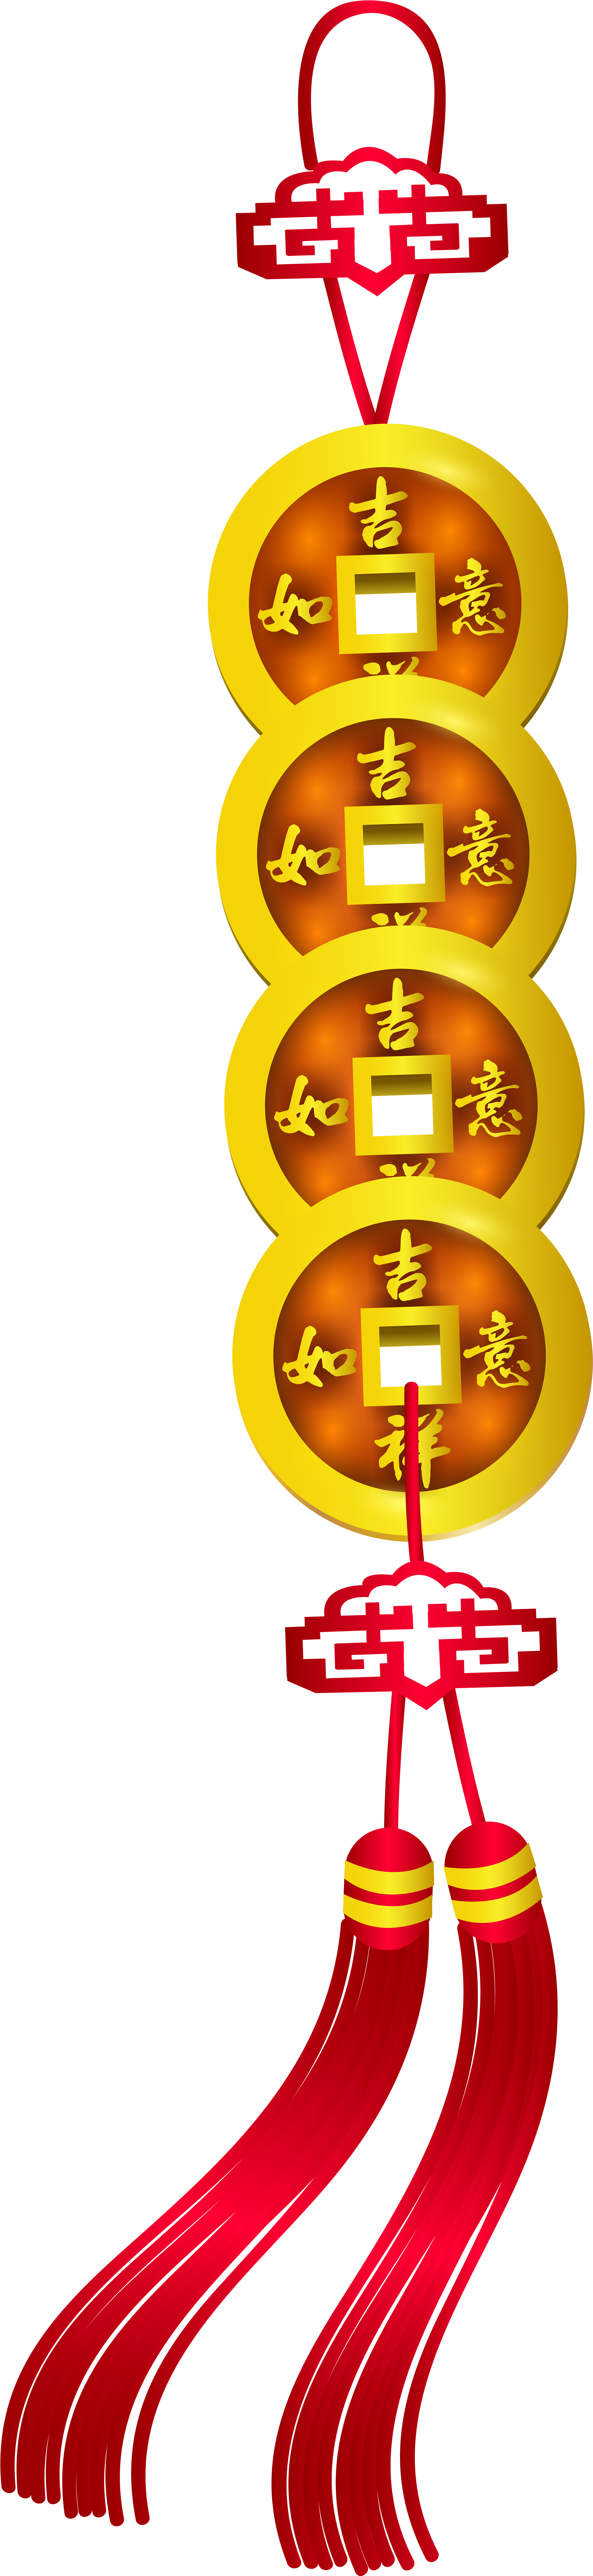 Chinese New Year Decoration Png Clip Art - Graphic Design (1928x8000)